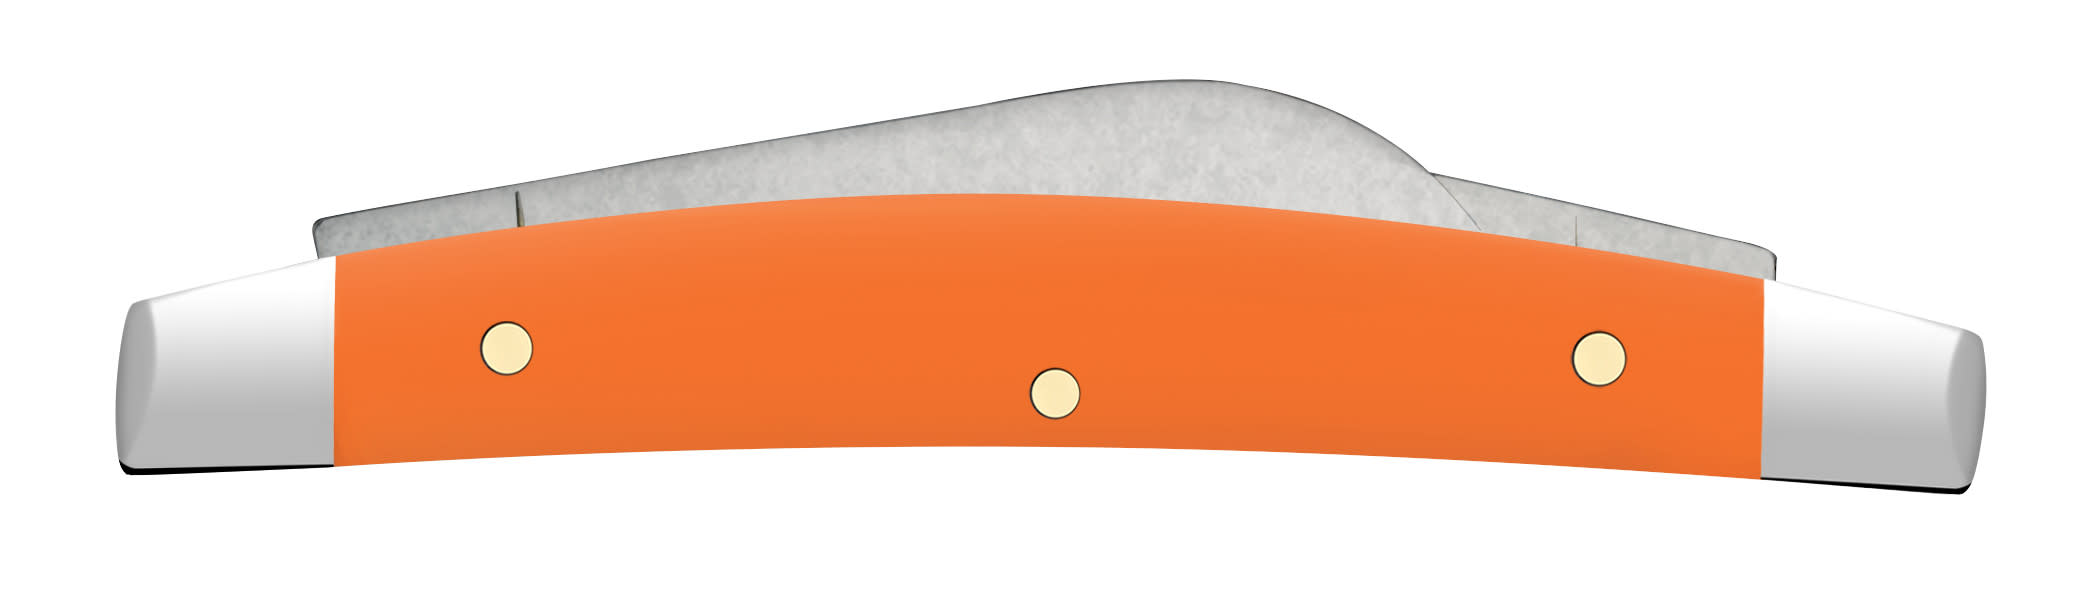 Smooth Orange Synthetic Small Congress Knife Closed